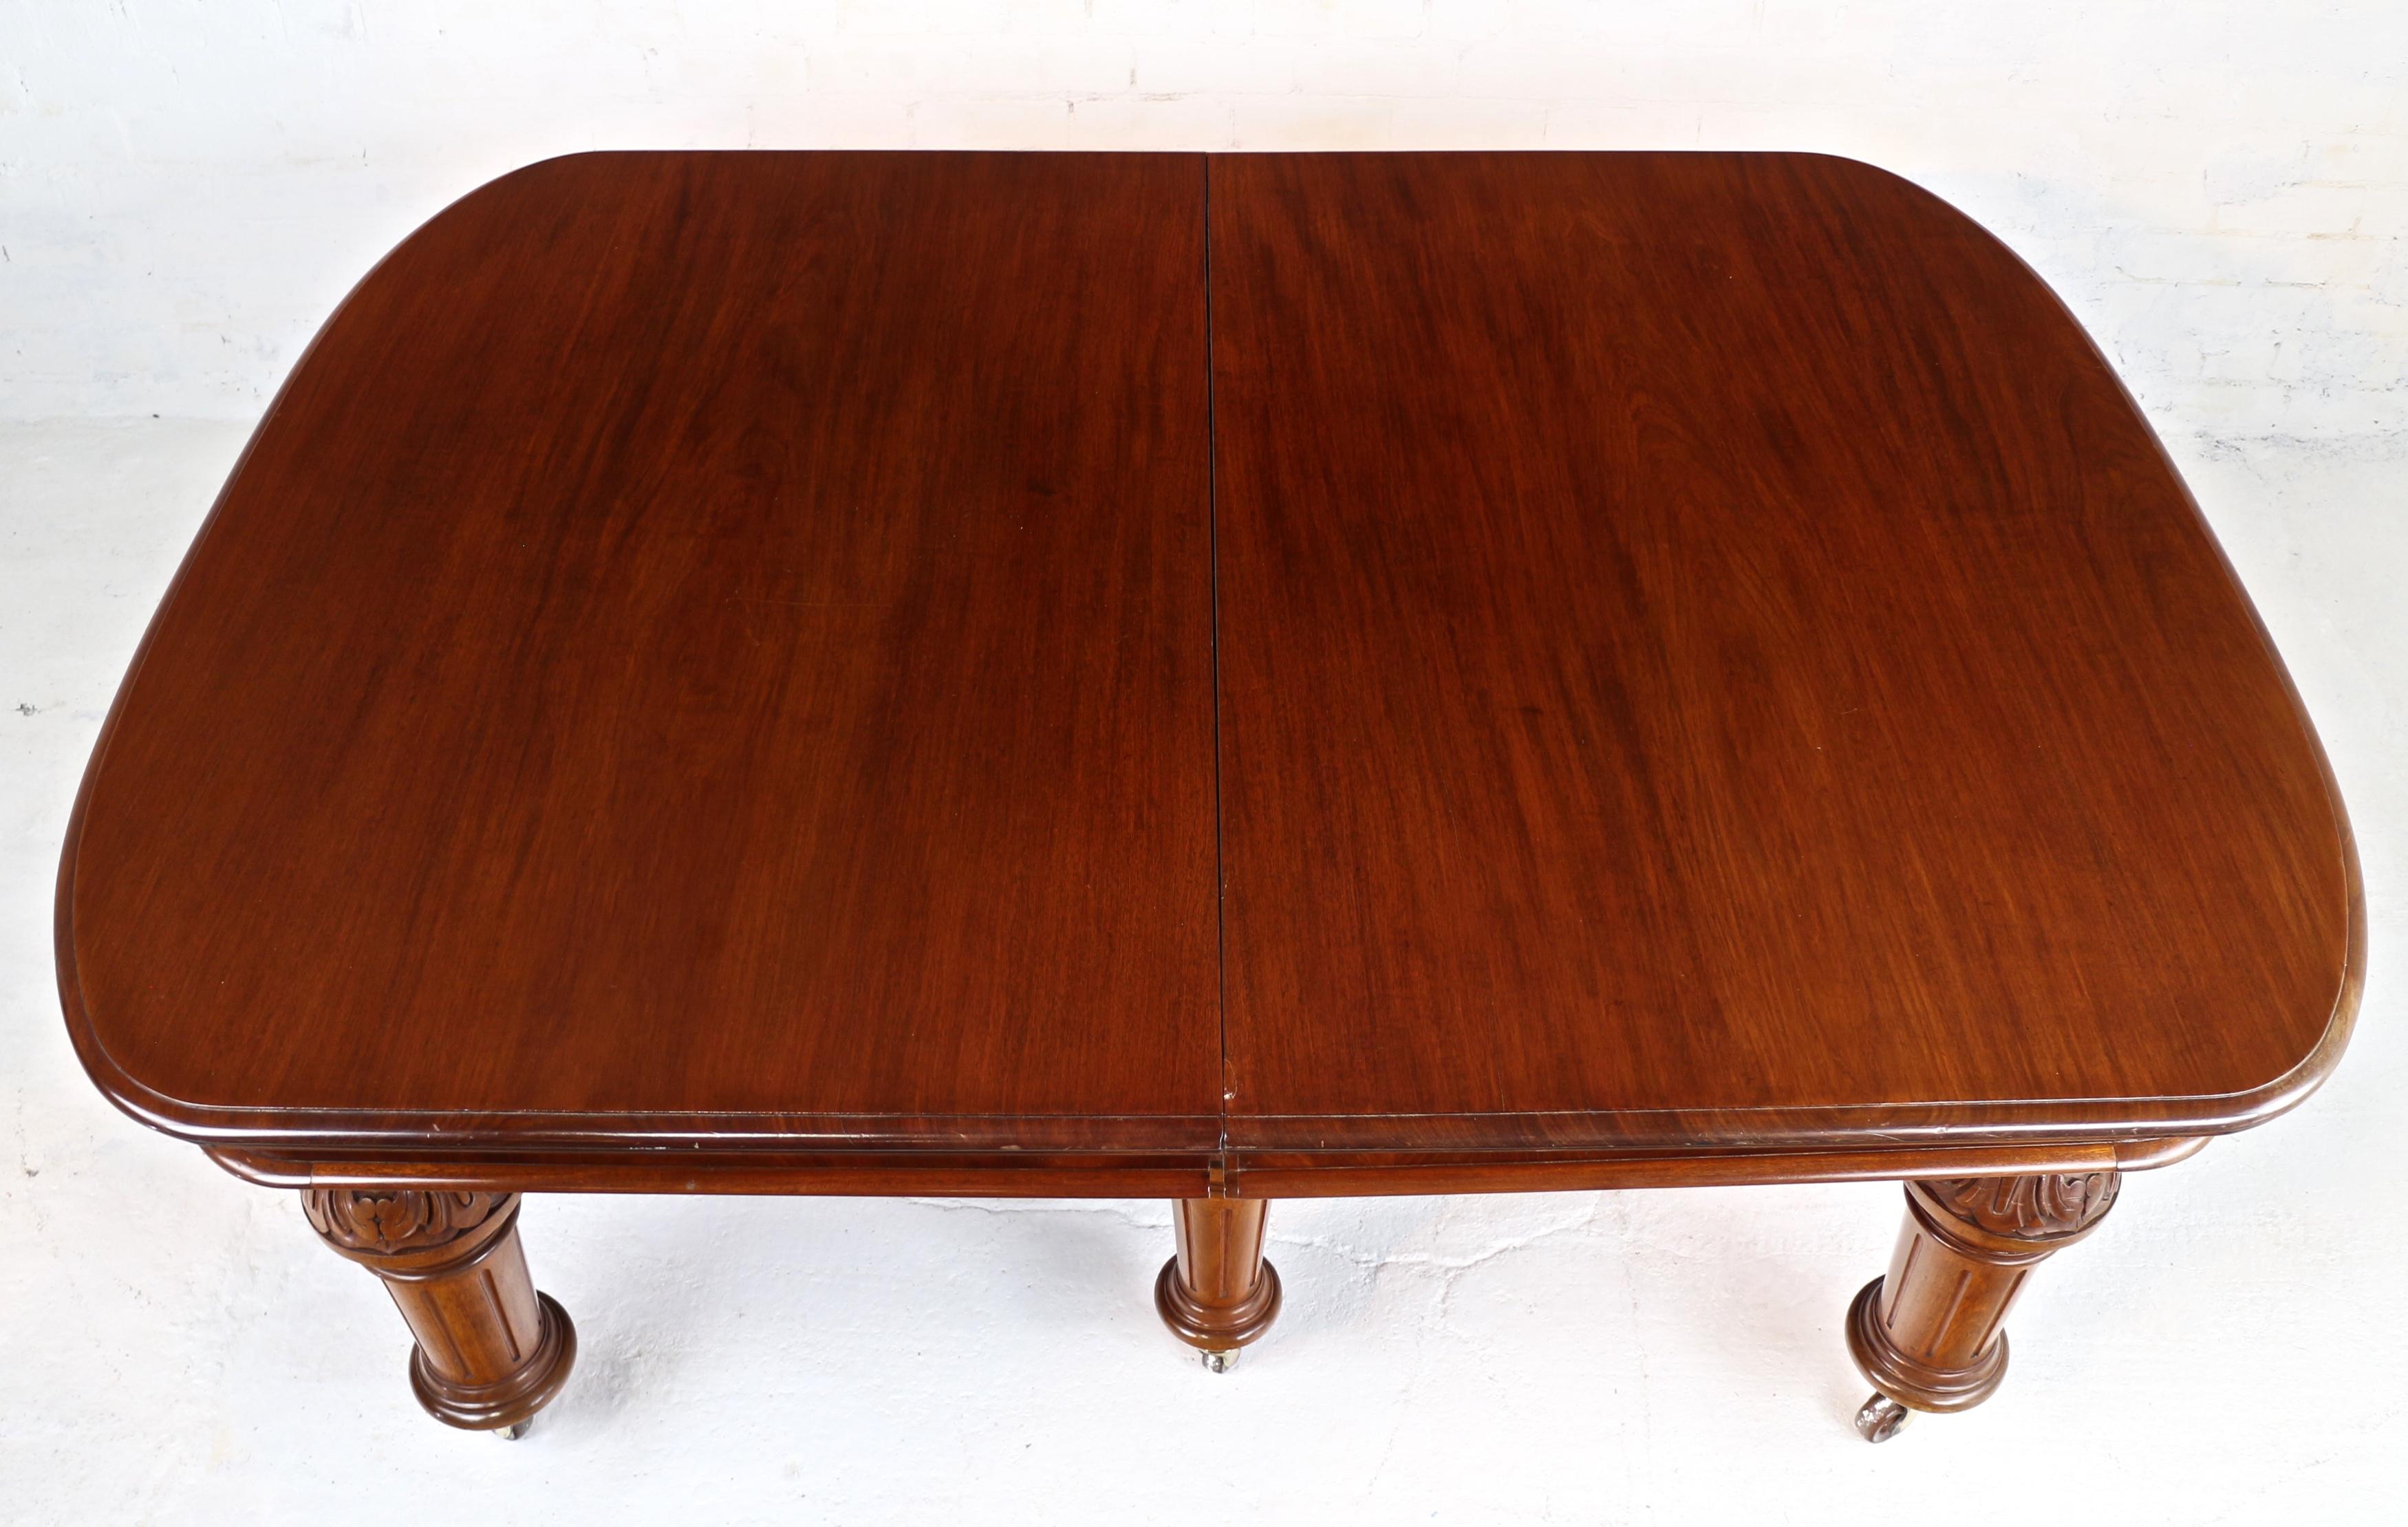 Antique English Victorian Mahogany Extending Dining Table and 4 Leaves, Seats 16 For Sale 10